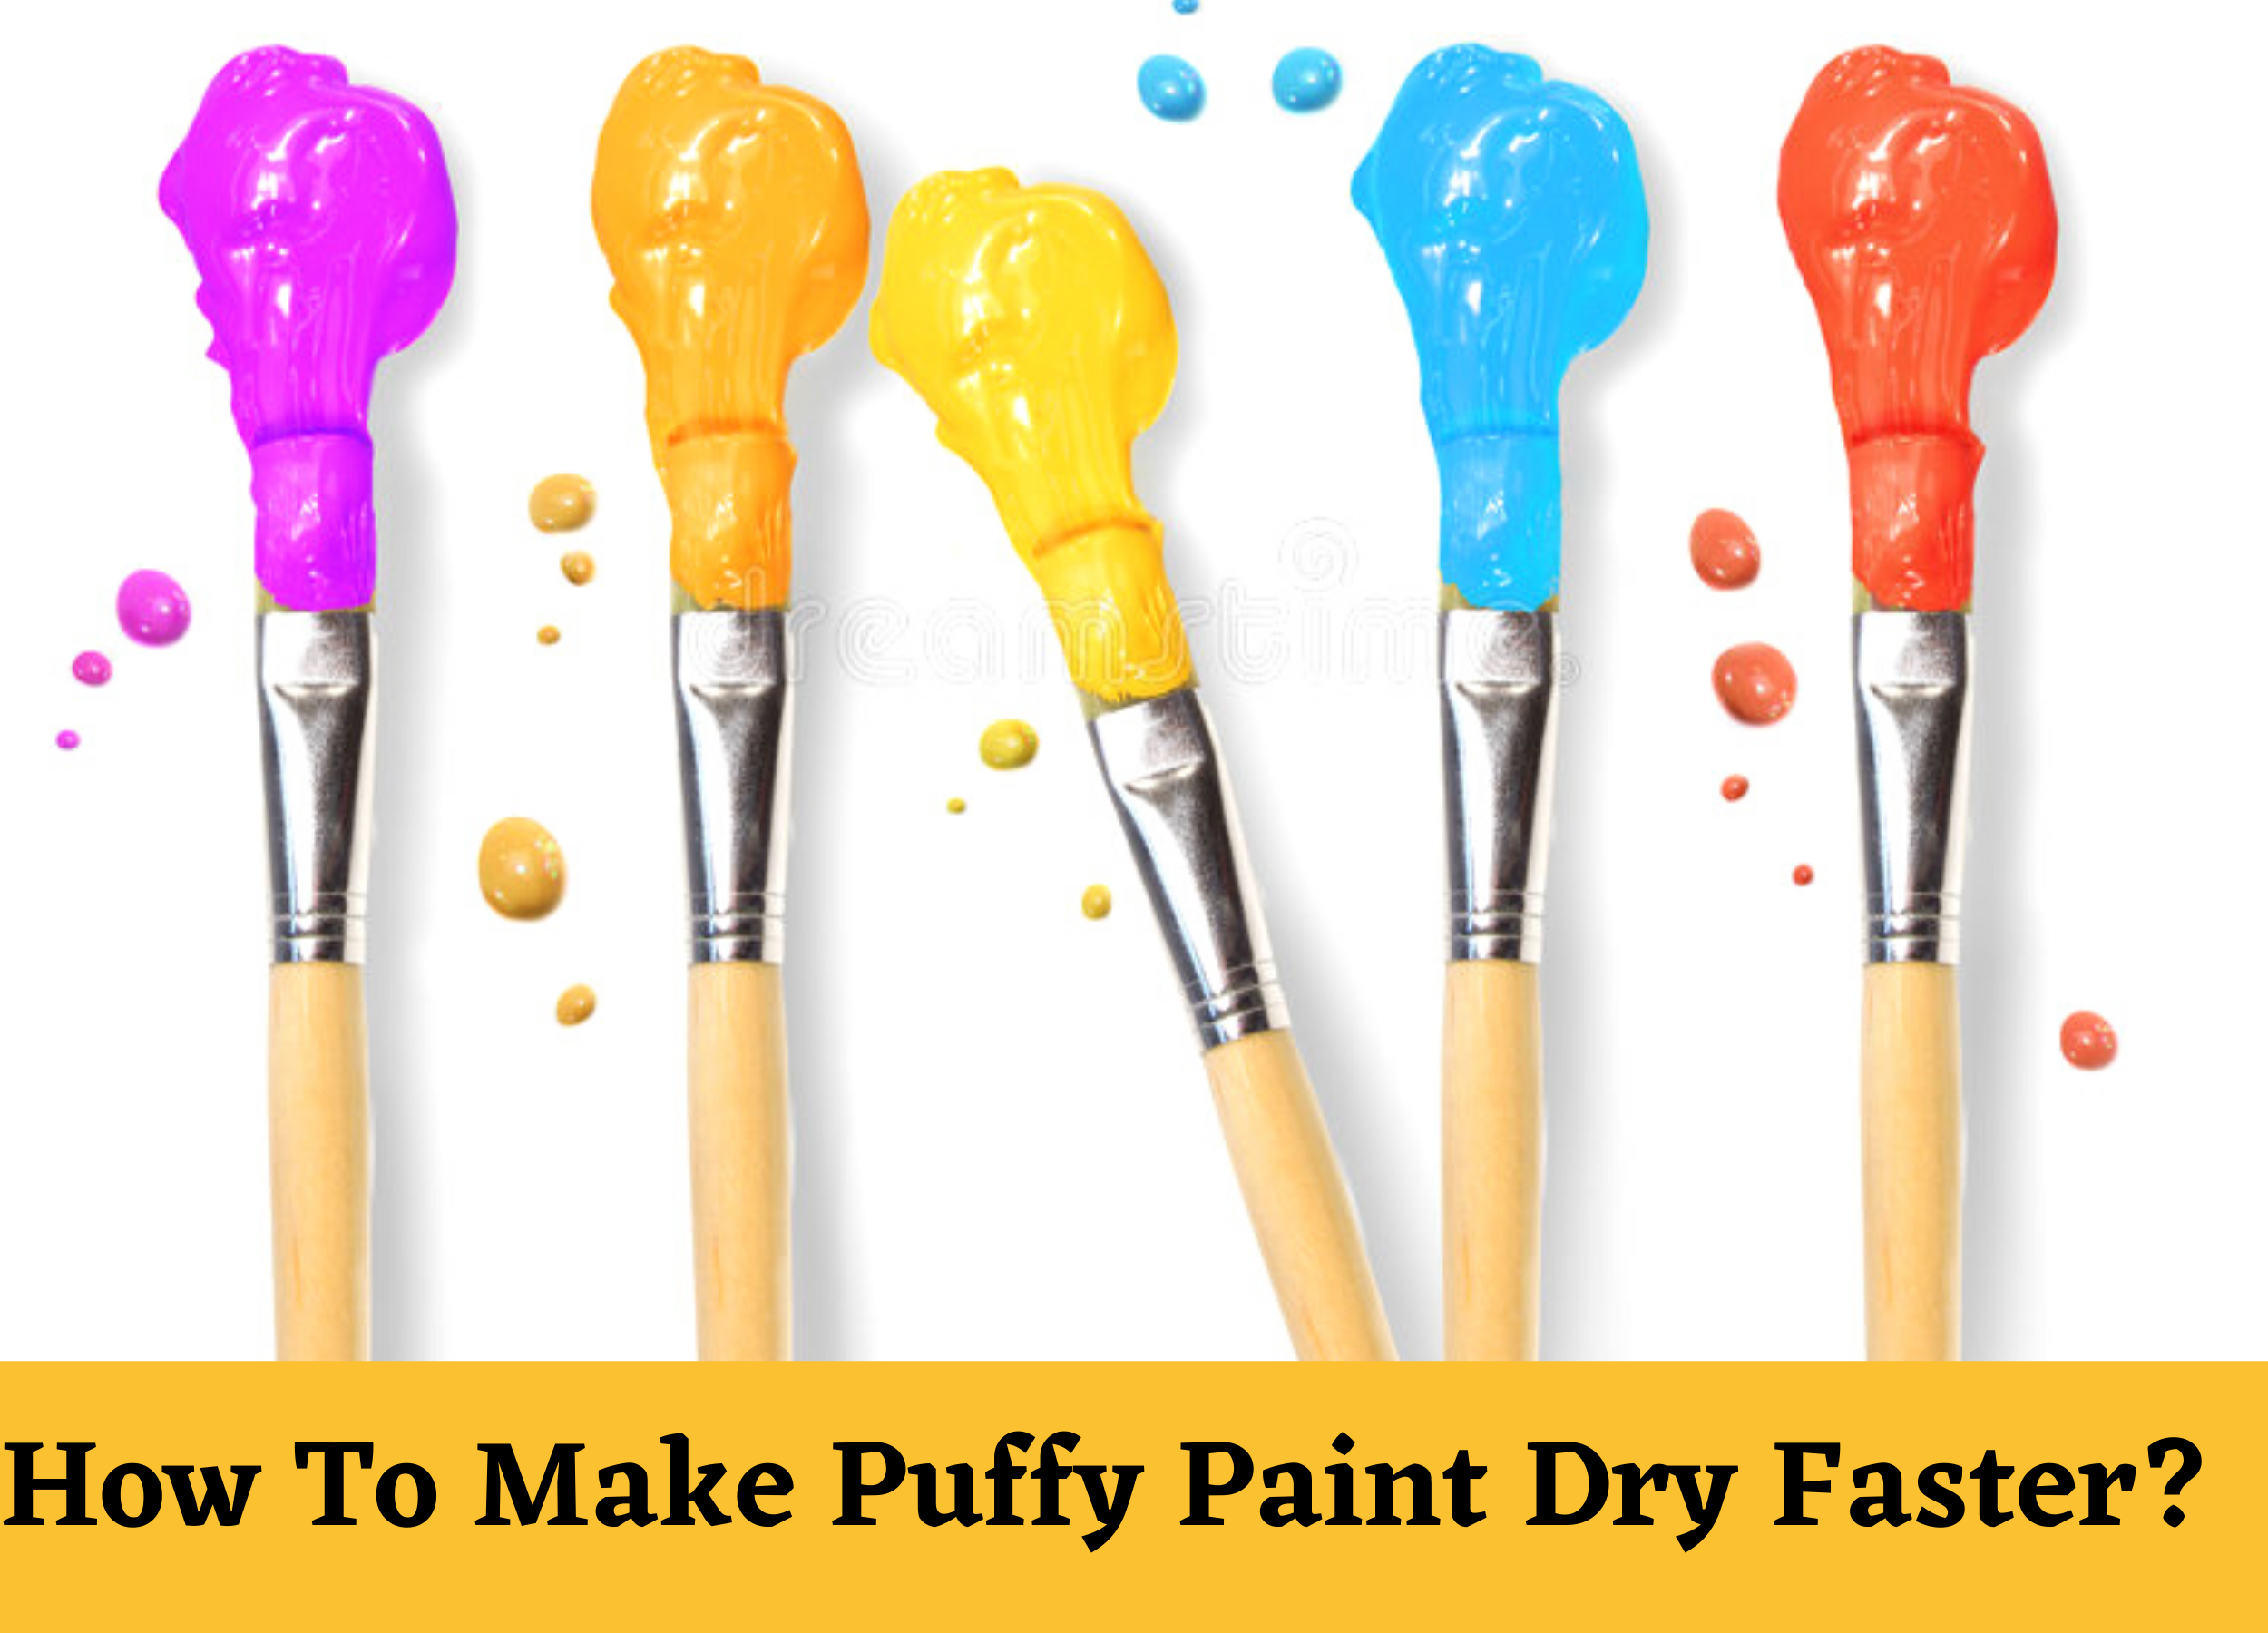 How To Make Puffy Paint Dry Faster